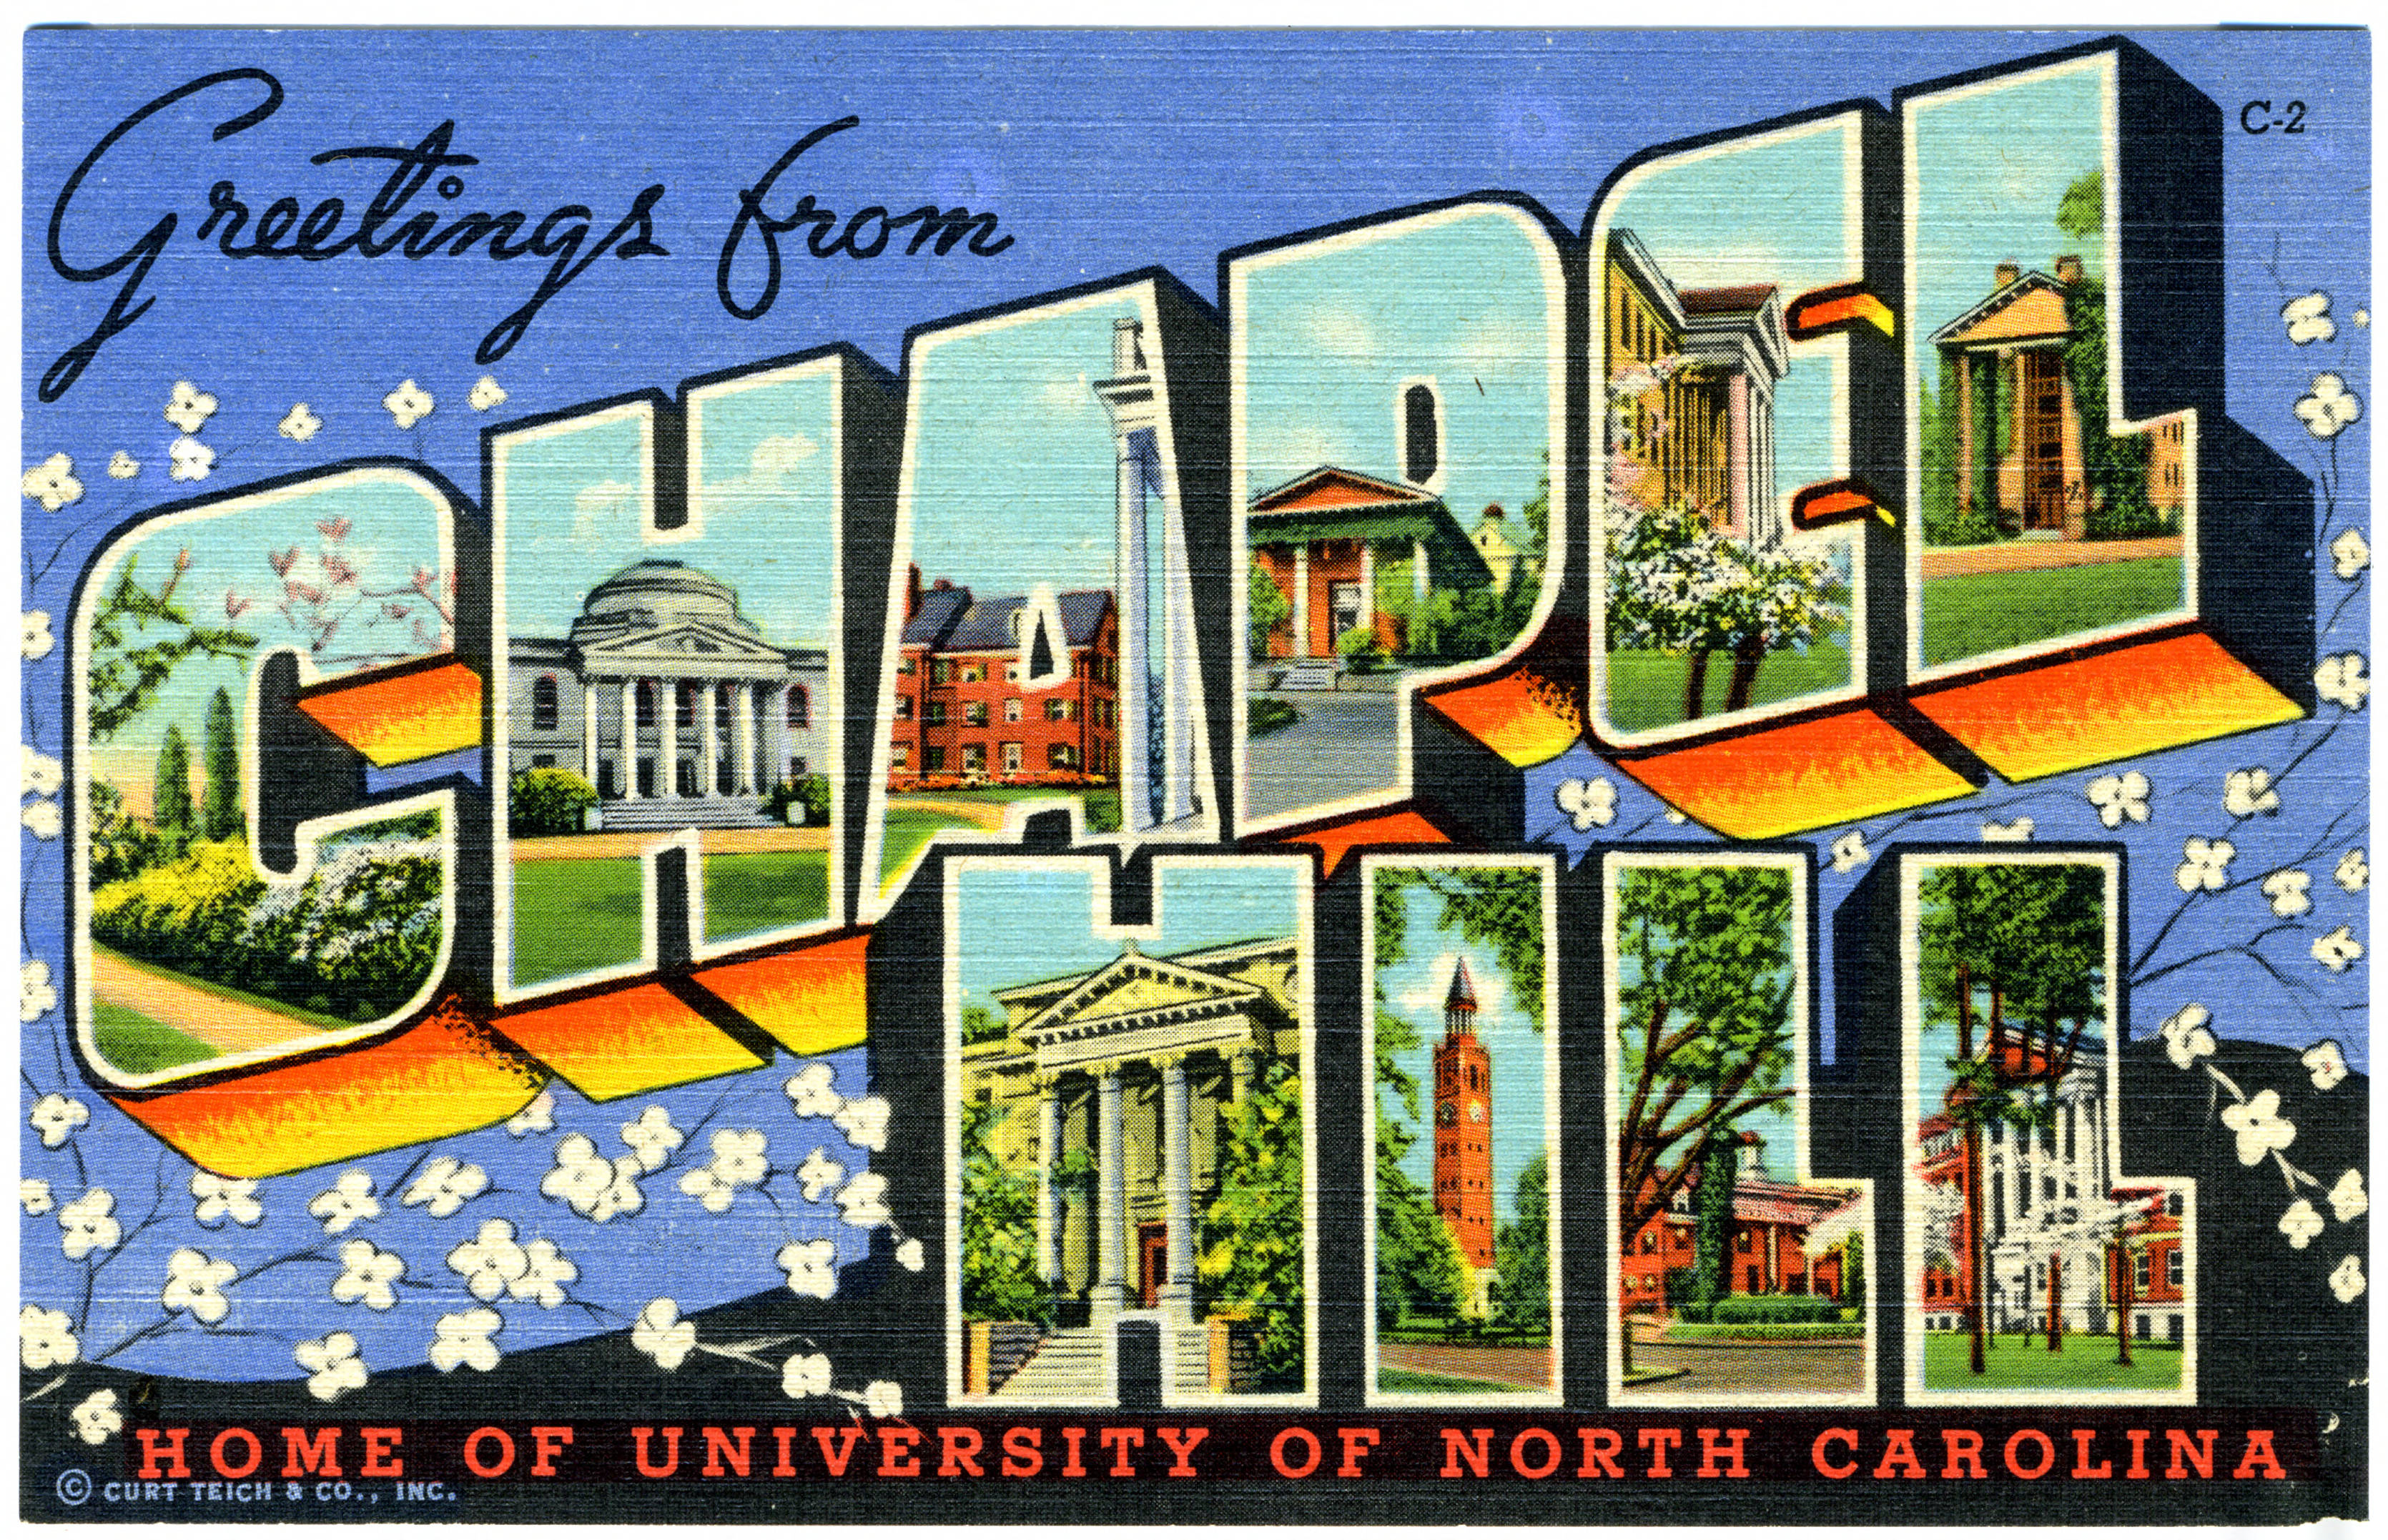 Greetings from Chapel Hill